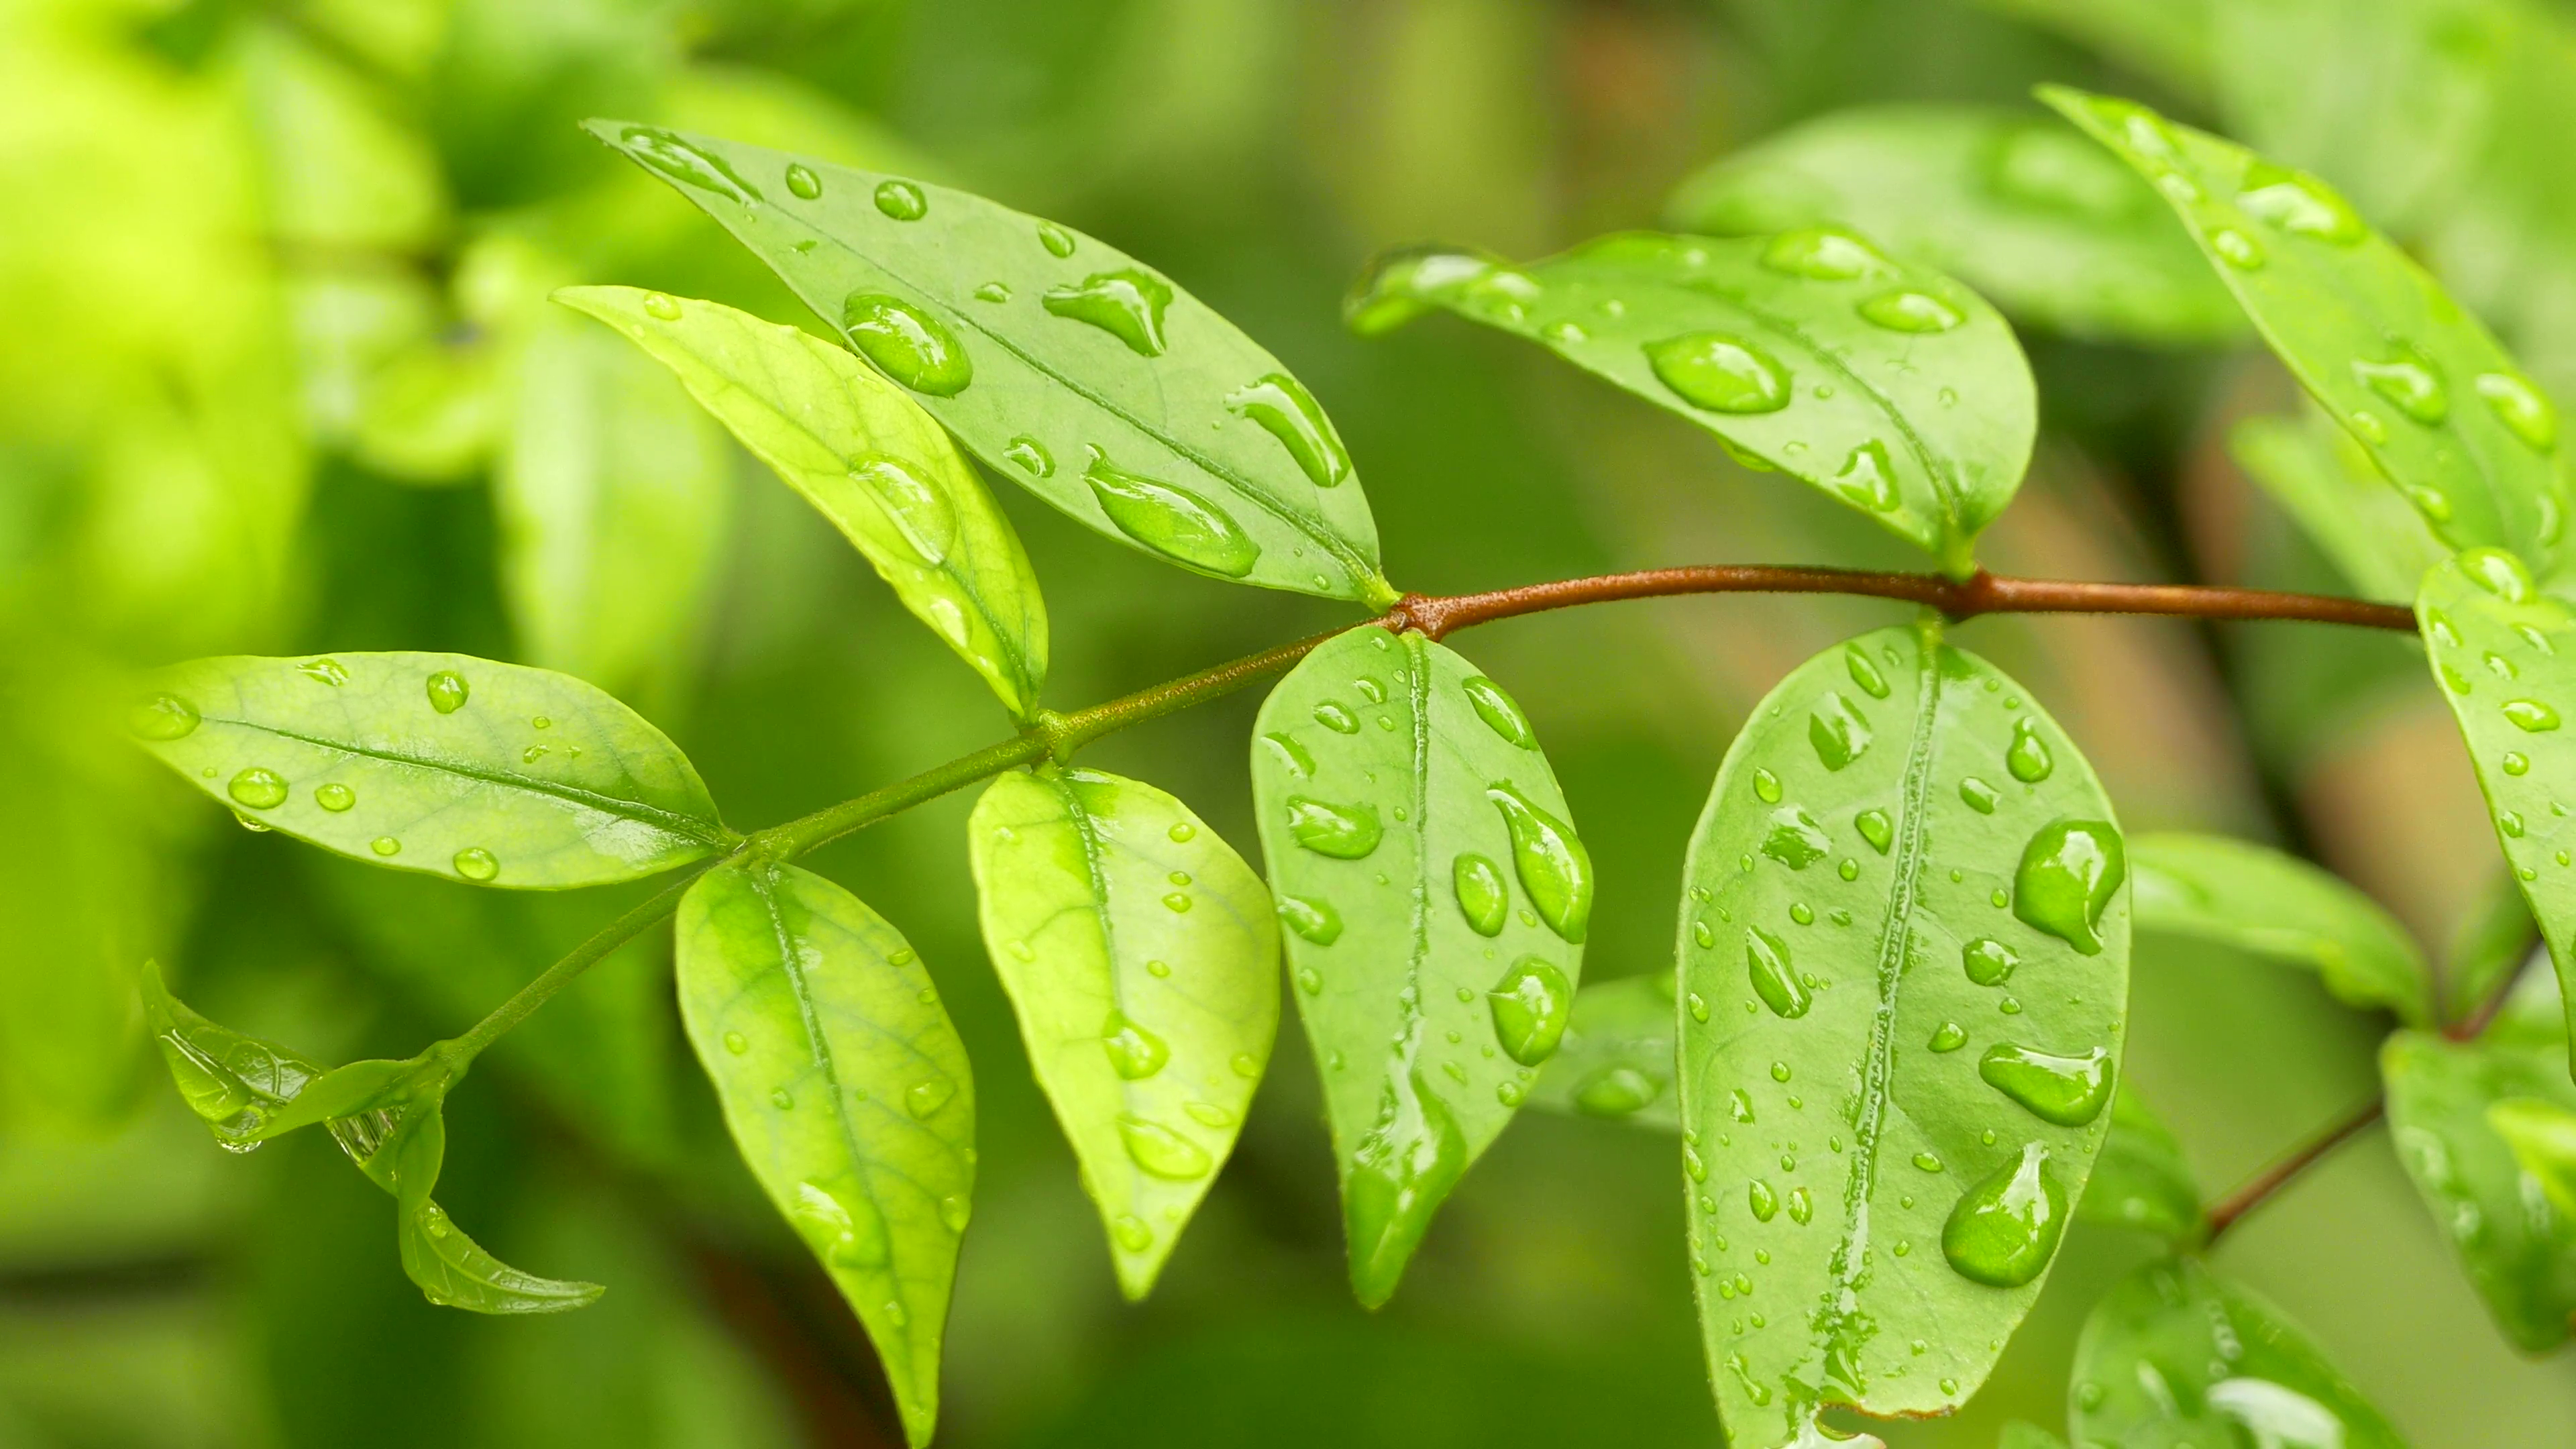 Leaf with water drops close-up after rain in the nature:Ultra HD 4K ...